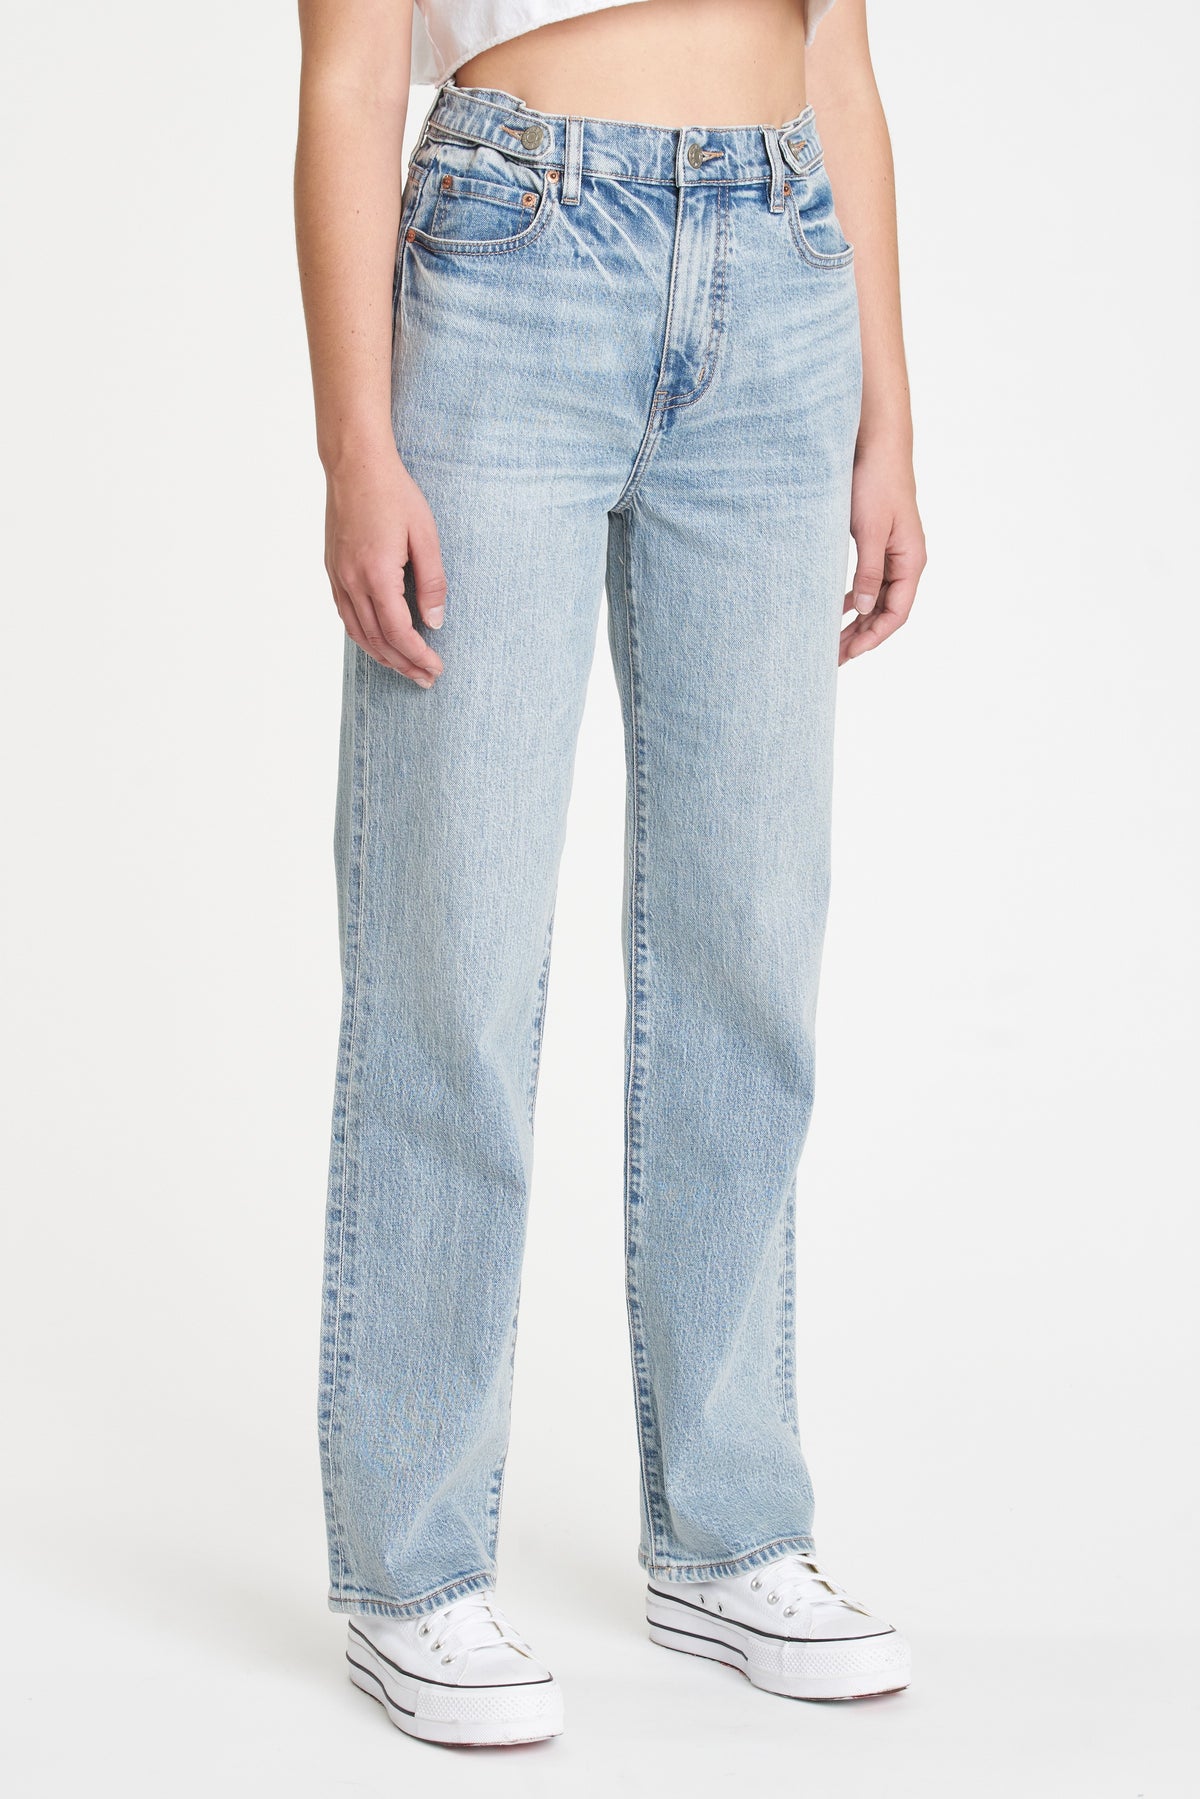 1999 Jeans Slouch 90s Fit in Pull Me Closer